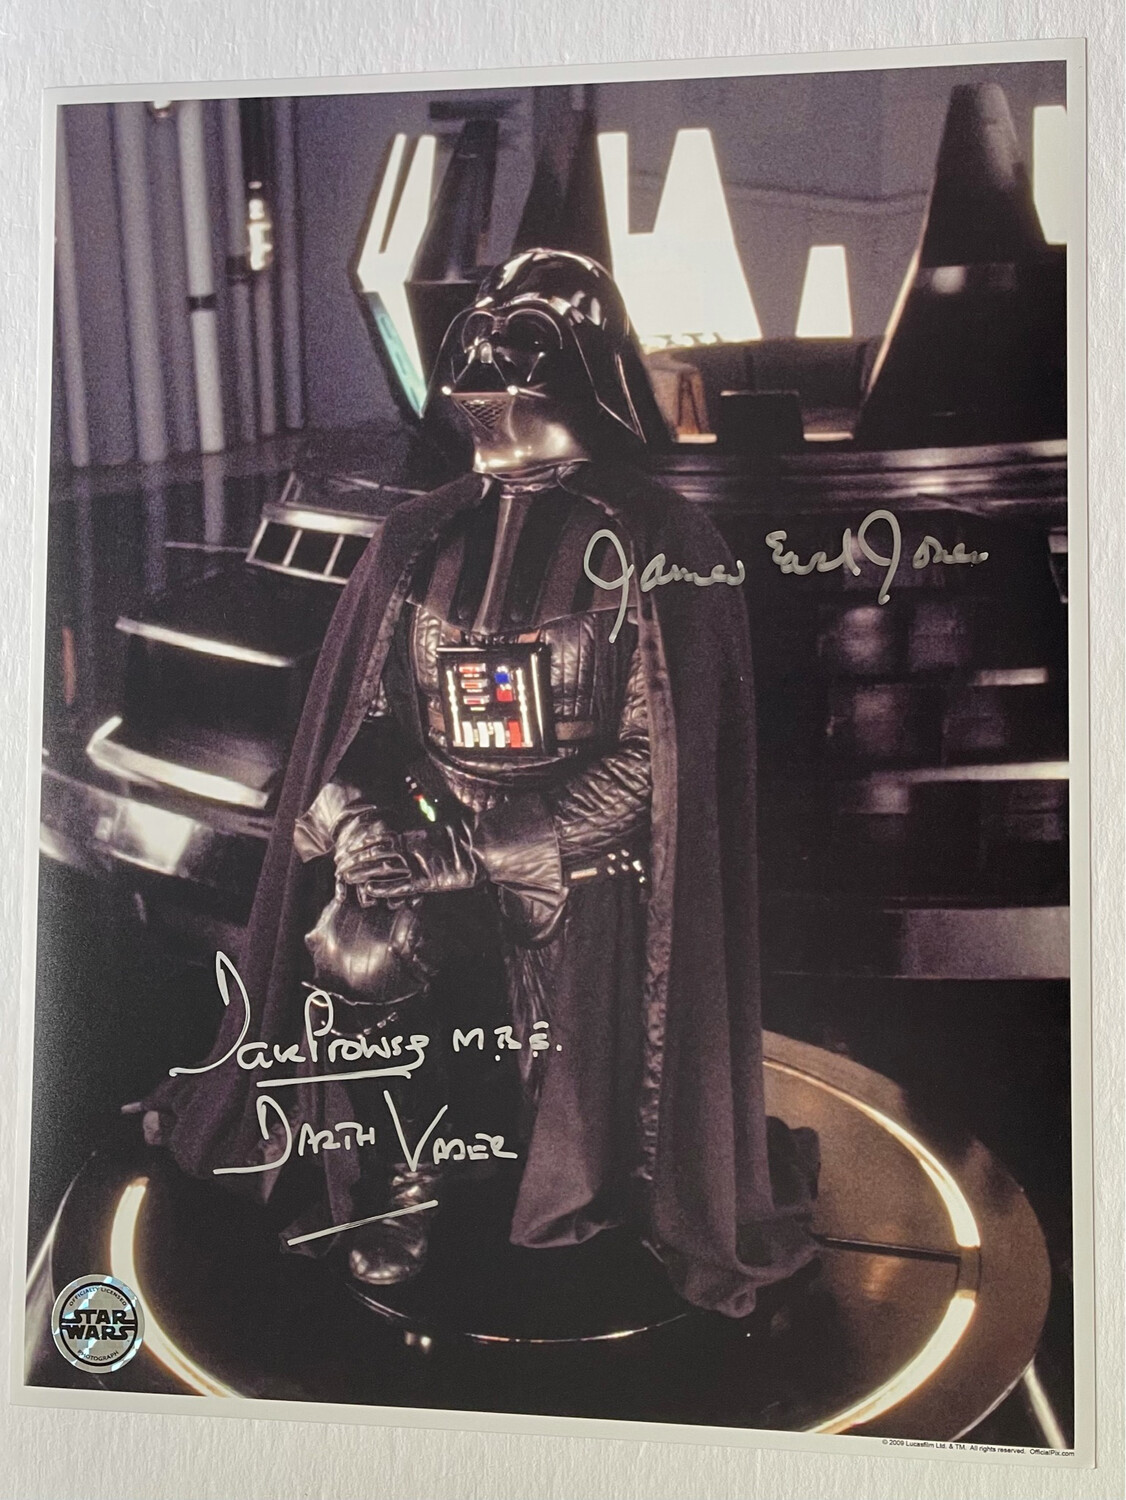 11X14 DARTH VADER PHOTO SIGNED BY DAVE PROWSE AND JAMES EARL JONES